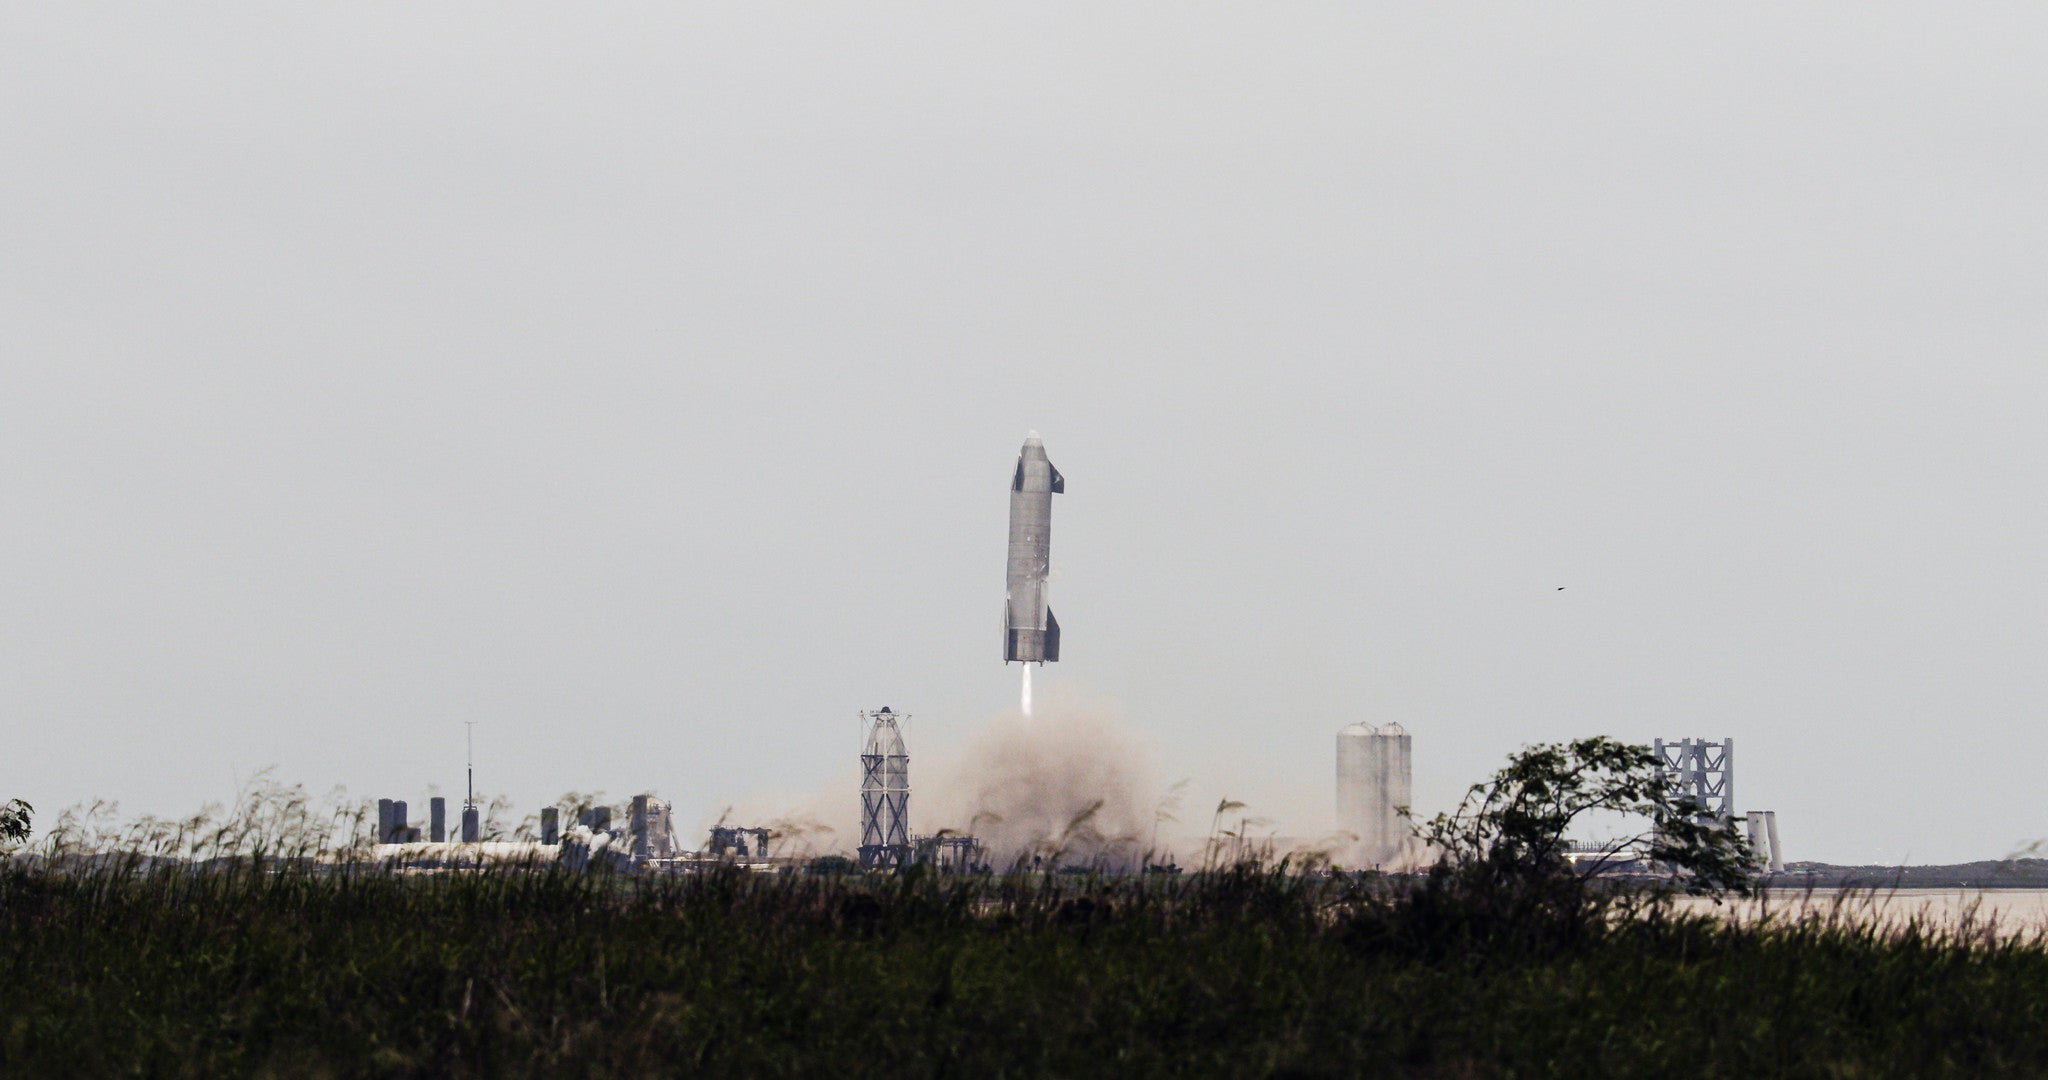 SpaceX Moves Starship SN15 To The Launch Pad To Prepare For Potential Reflight